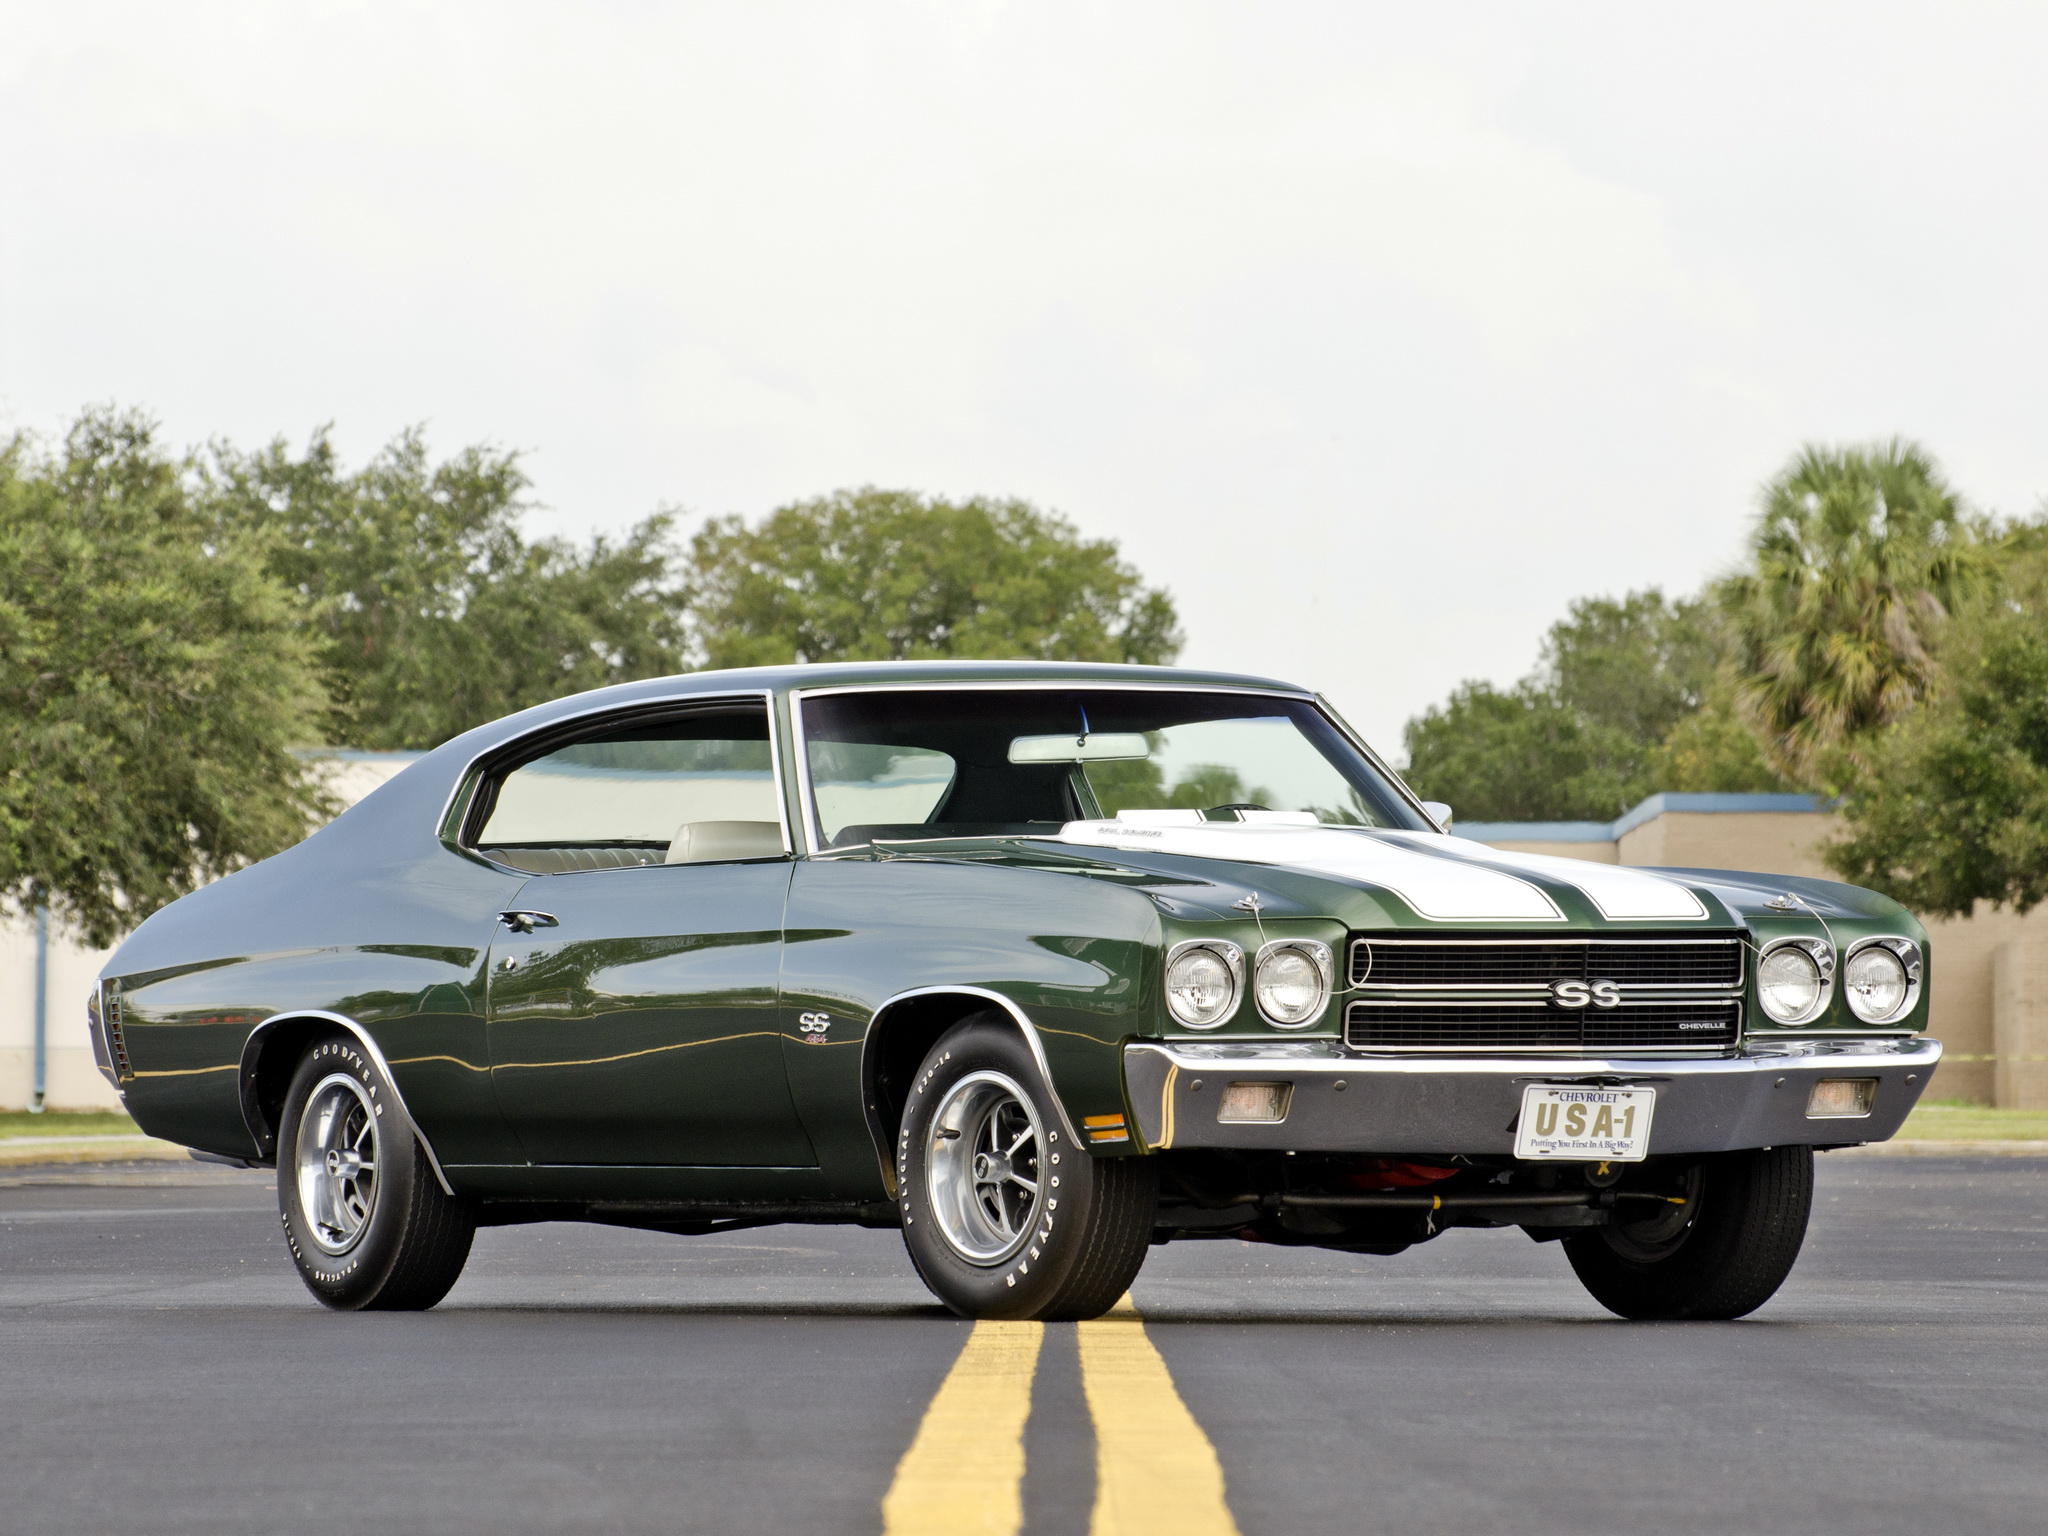 1970 Chevrolet Chevelle SS 454 LS6 Hardtop Coupe muscle classic 2048x1536